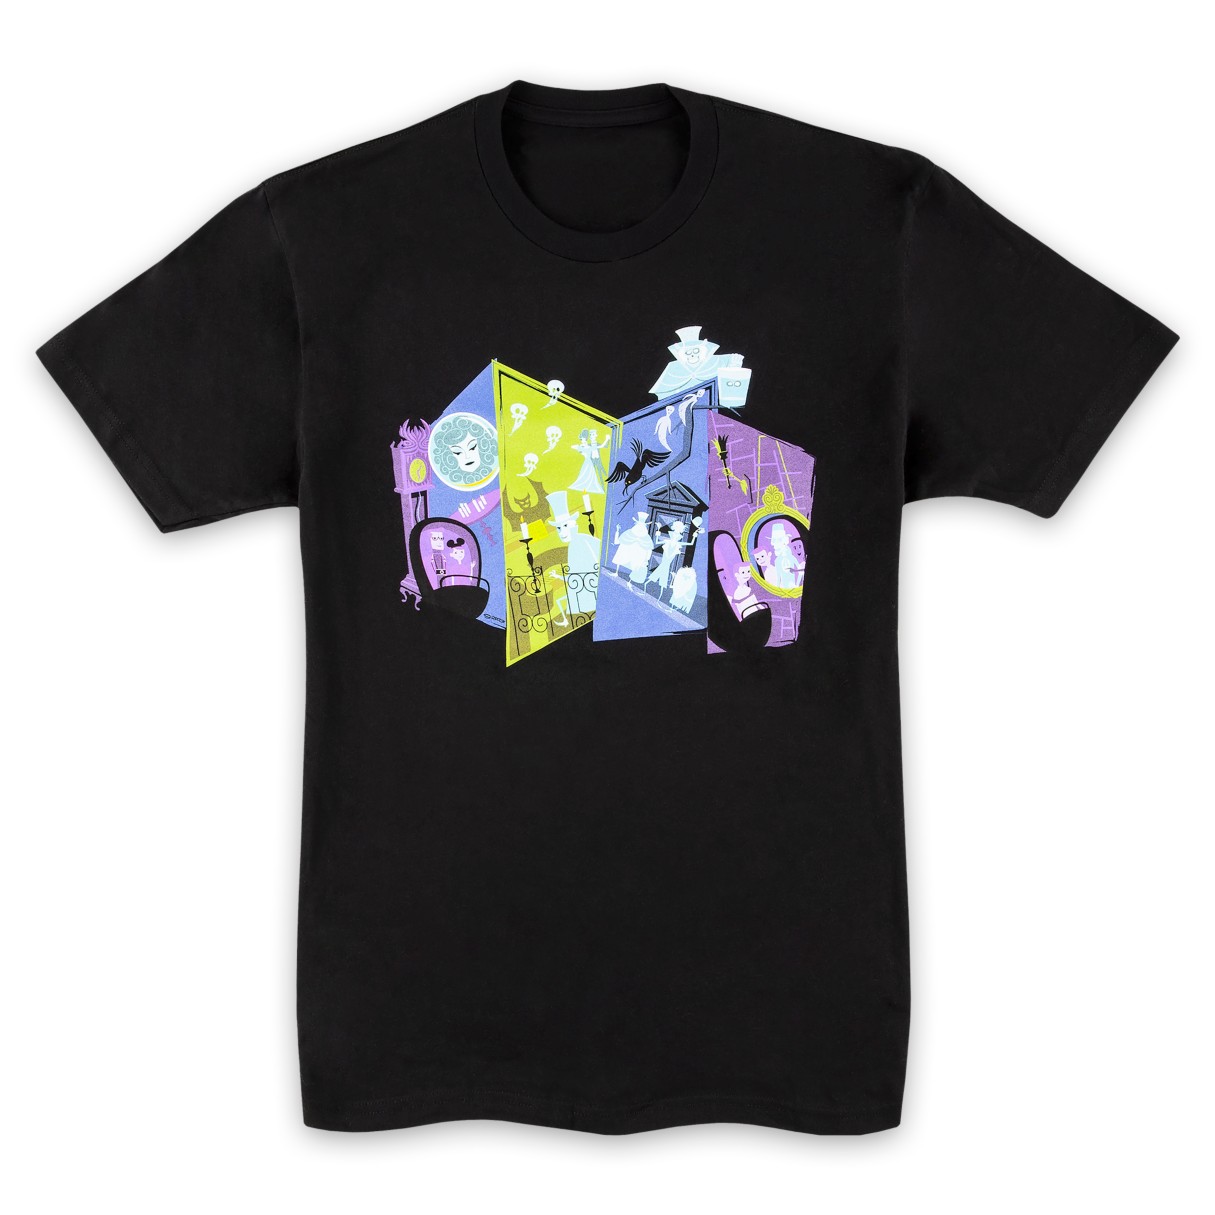 The Haunted Mansion ''31 Ghosts'' T-Shirt for Adults by SHAG